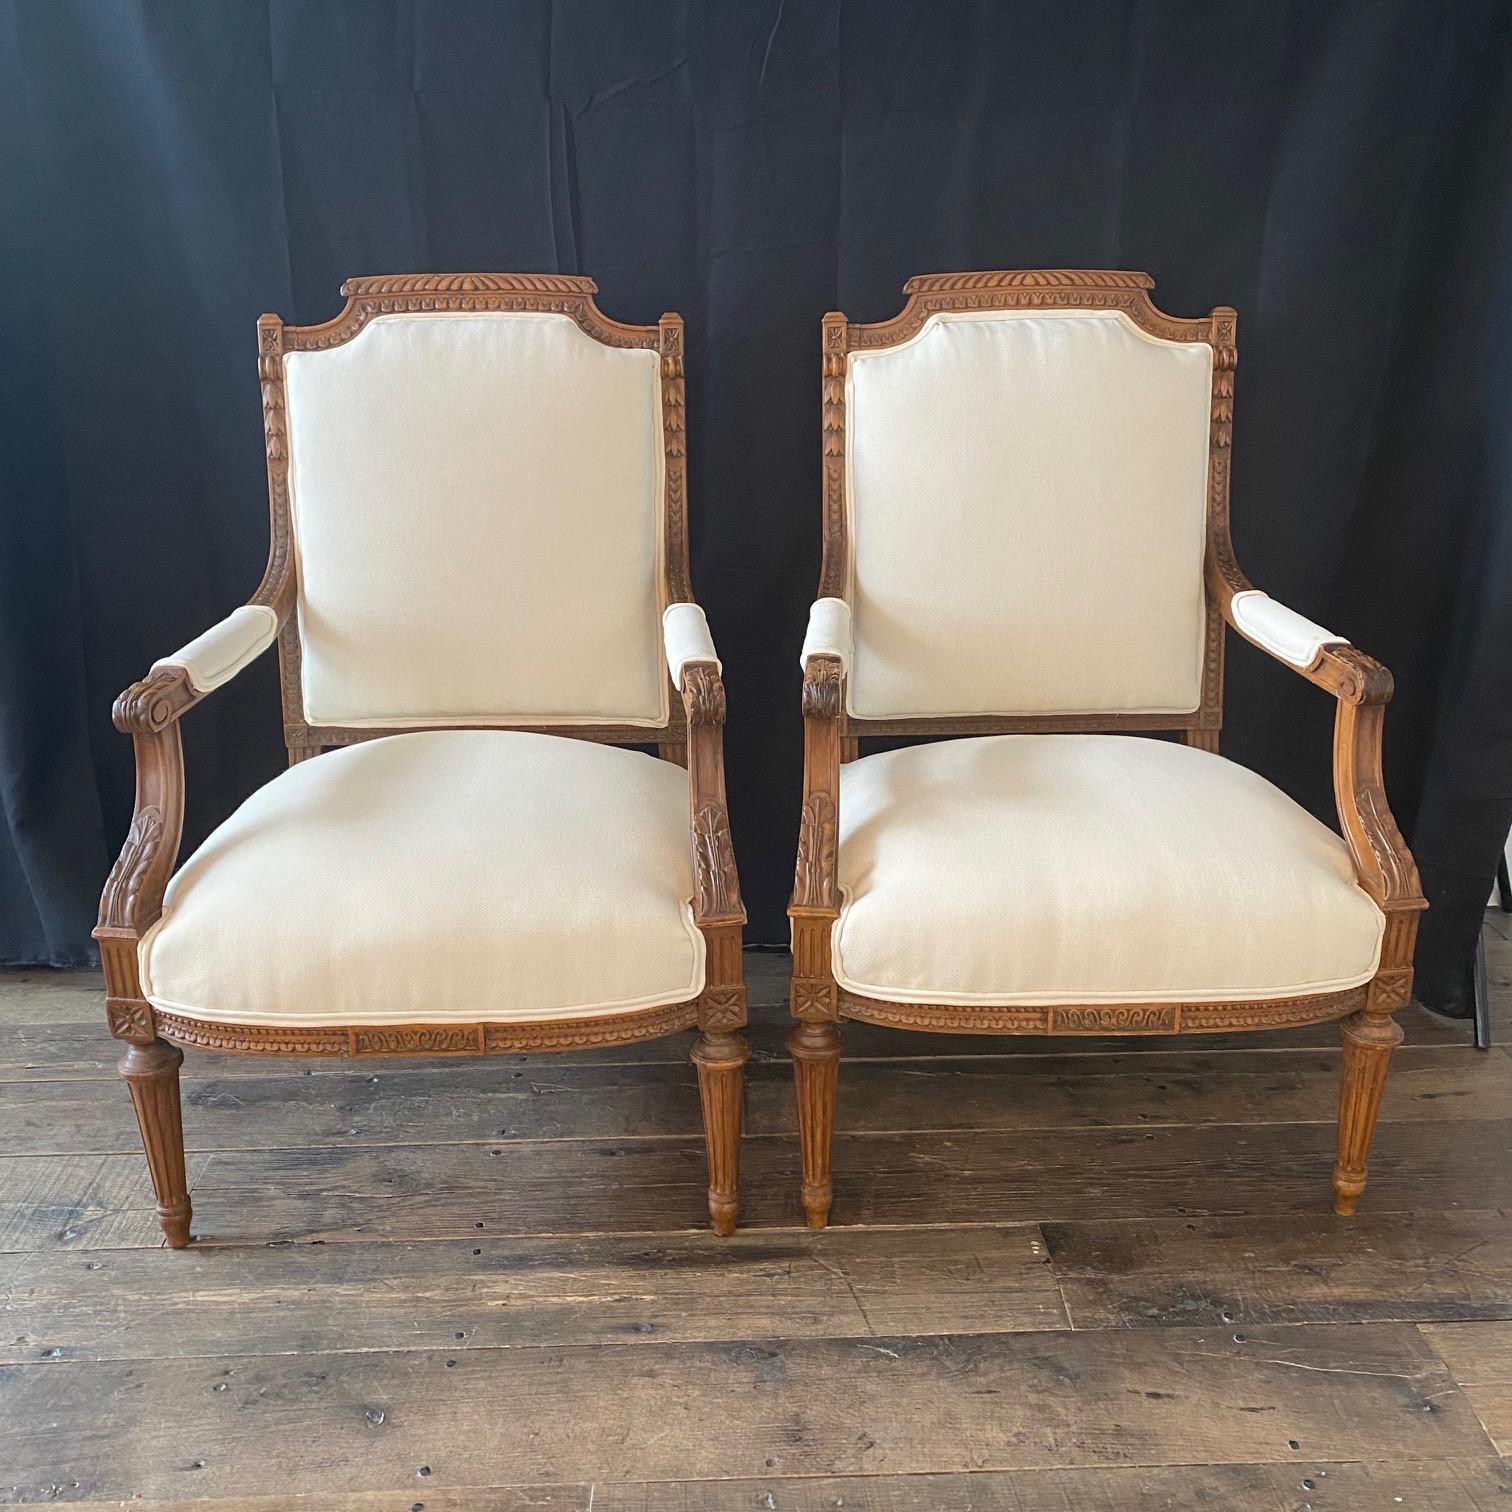 Pair of Antique French 19th Century Neoclassical Louis XVI Carved Armchairs For Sale 3